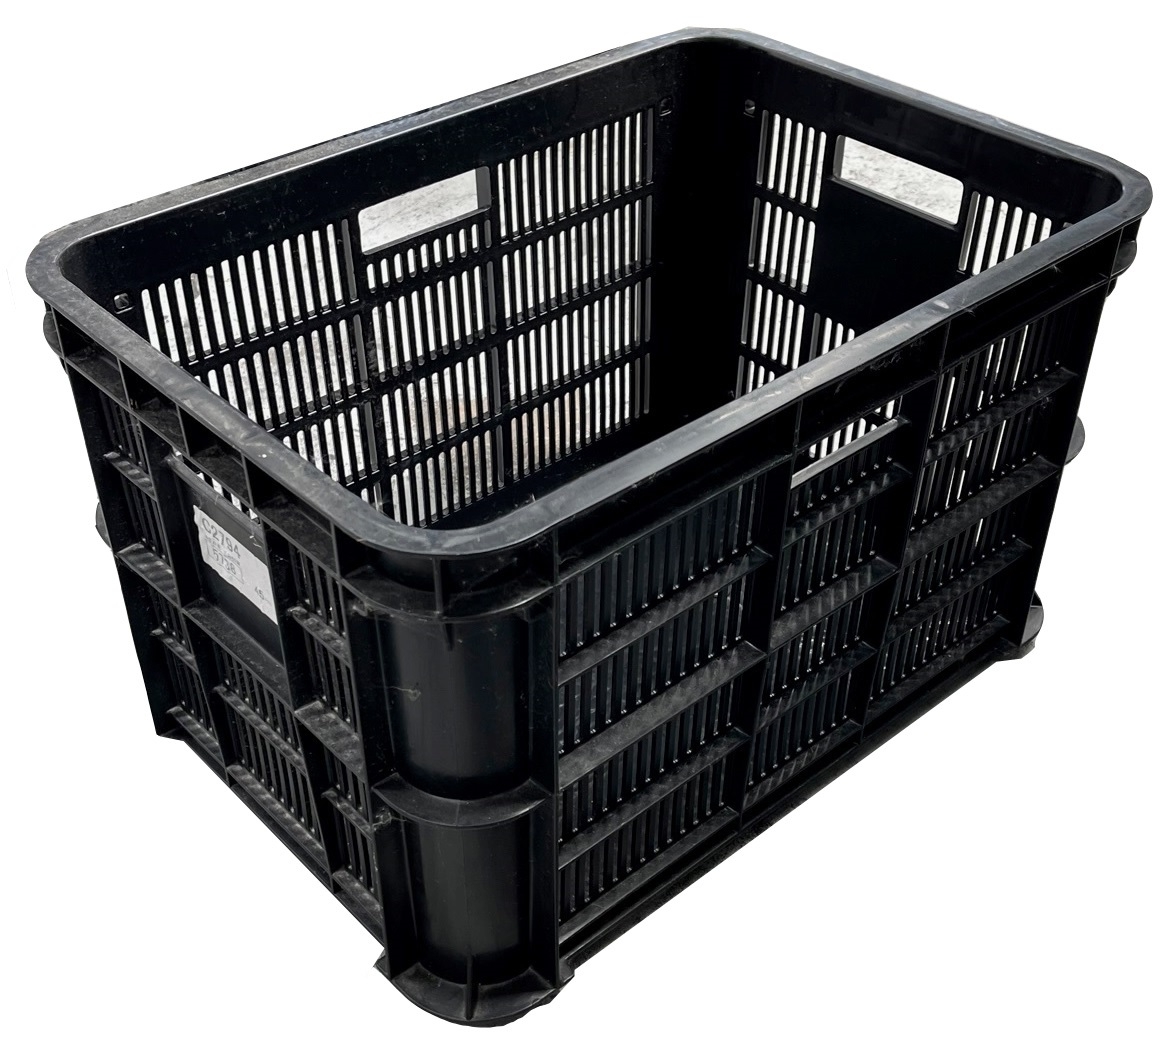 44 Litre Heavy Duty Ventilated  ULitrea Strong Stacking Plastic Crate